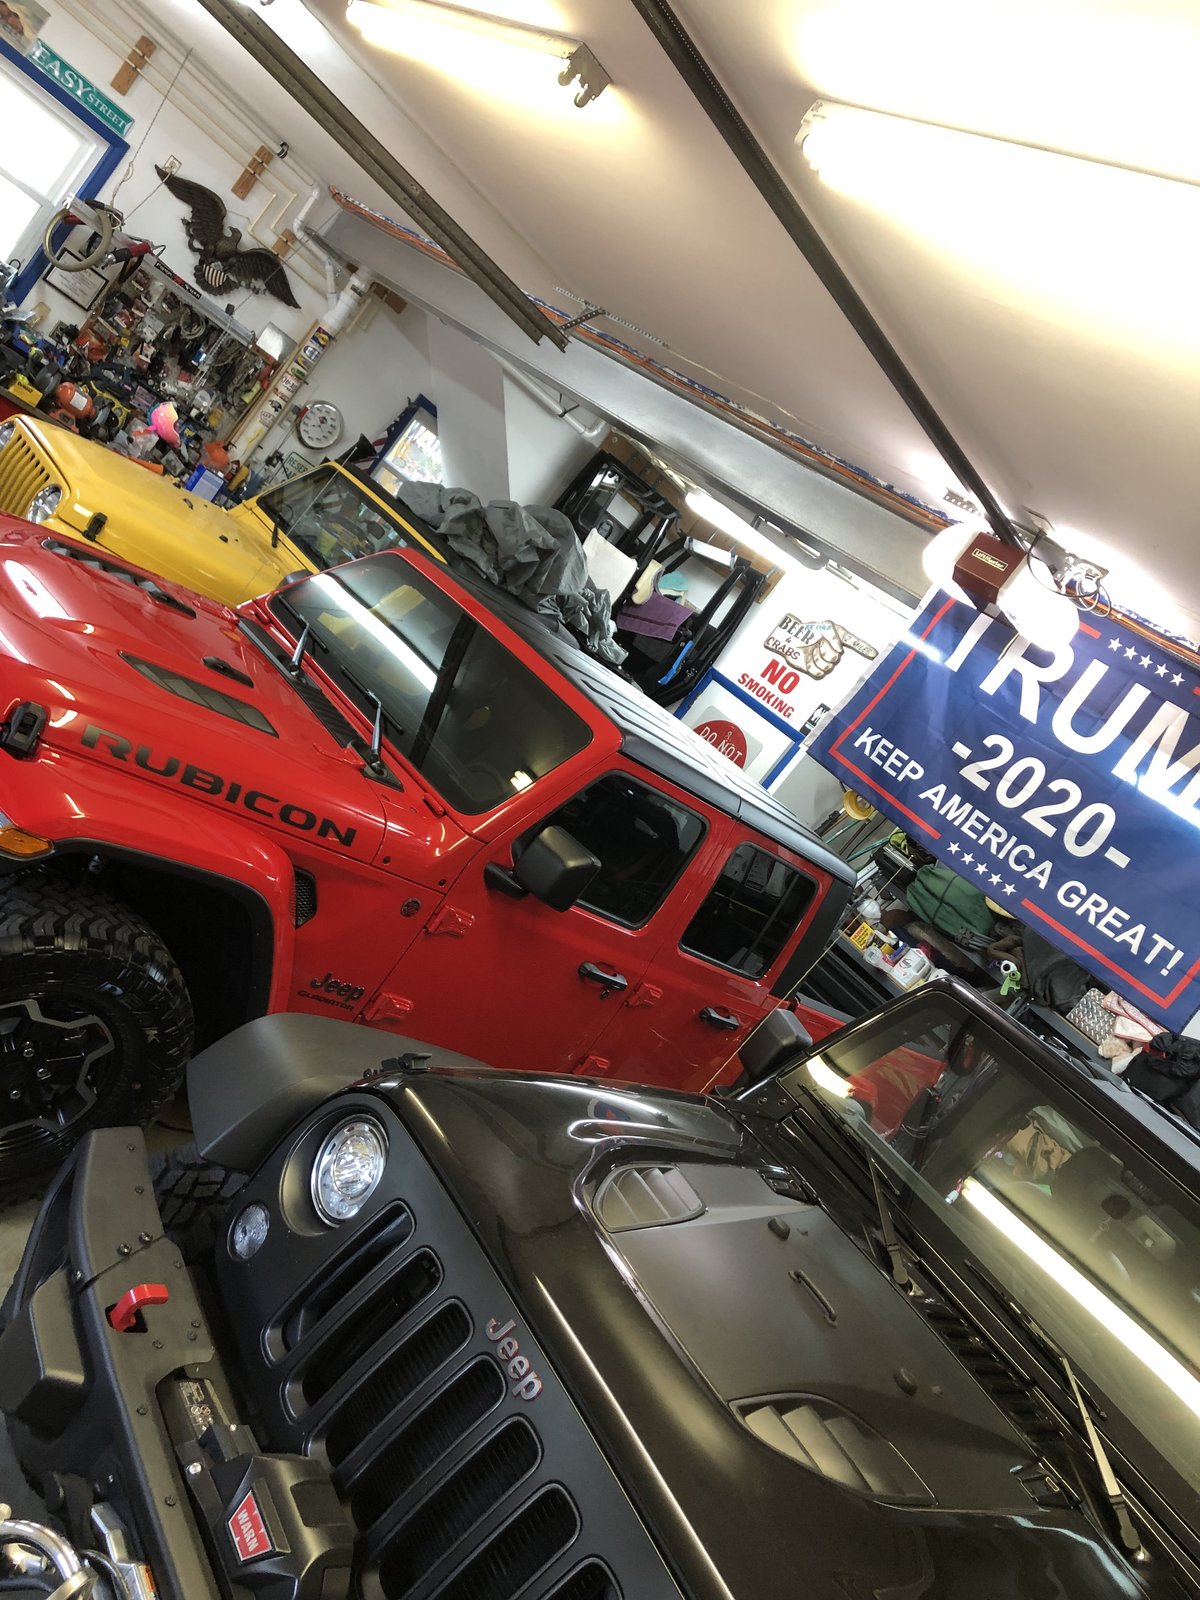 Jeep Gladiator Photo challenge.. Show me your Gladiator in your garage. B386D560-0976-44CD-A144-7B8015A76601